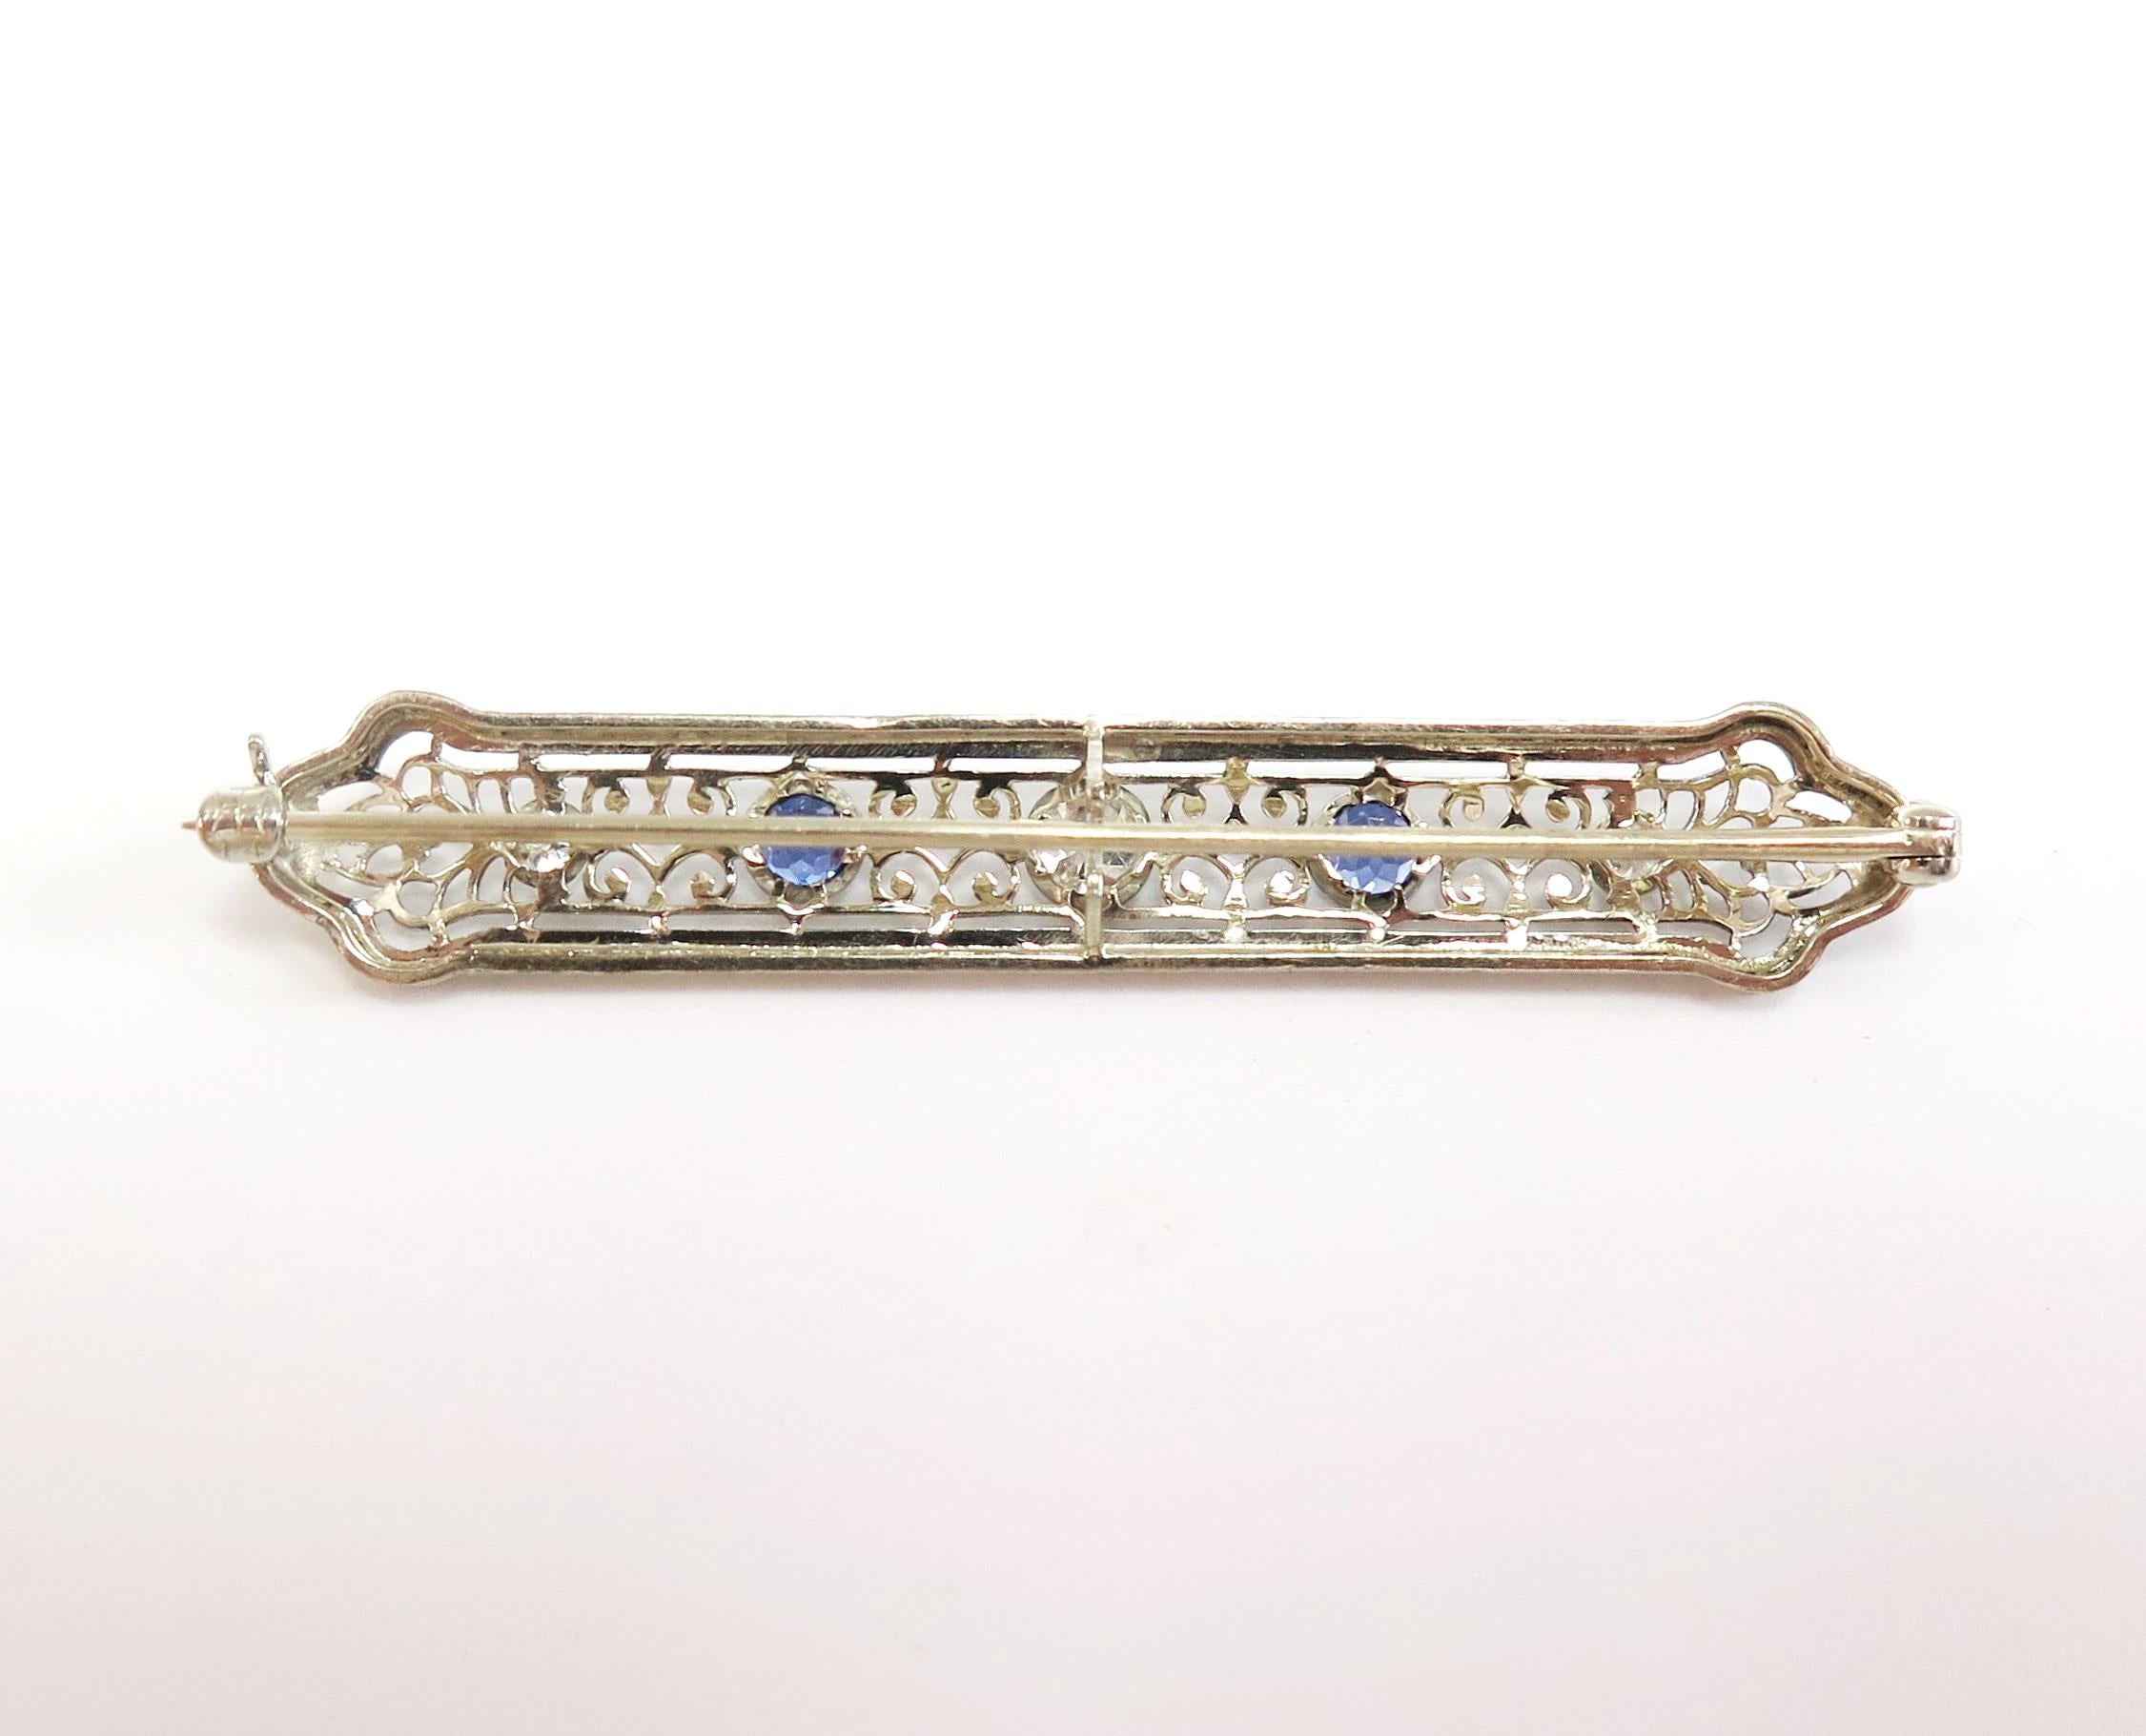 One bright white 0.20 Carat Old Mine Cut Diamond sparkles from the center of this delicate filigree bar pin. On either side is a deep sea Blue Sapphire and two white Old European Cut Diamonds. 

The total weight of the three Diamonds is 0.28 Carats,